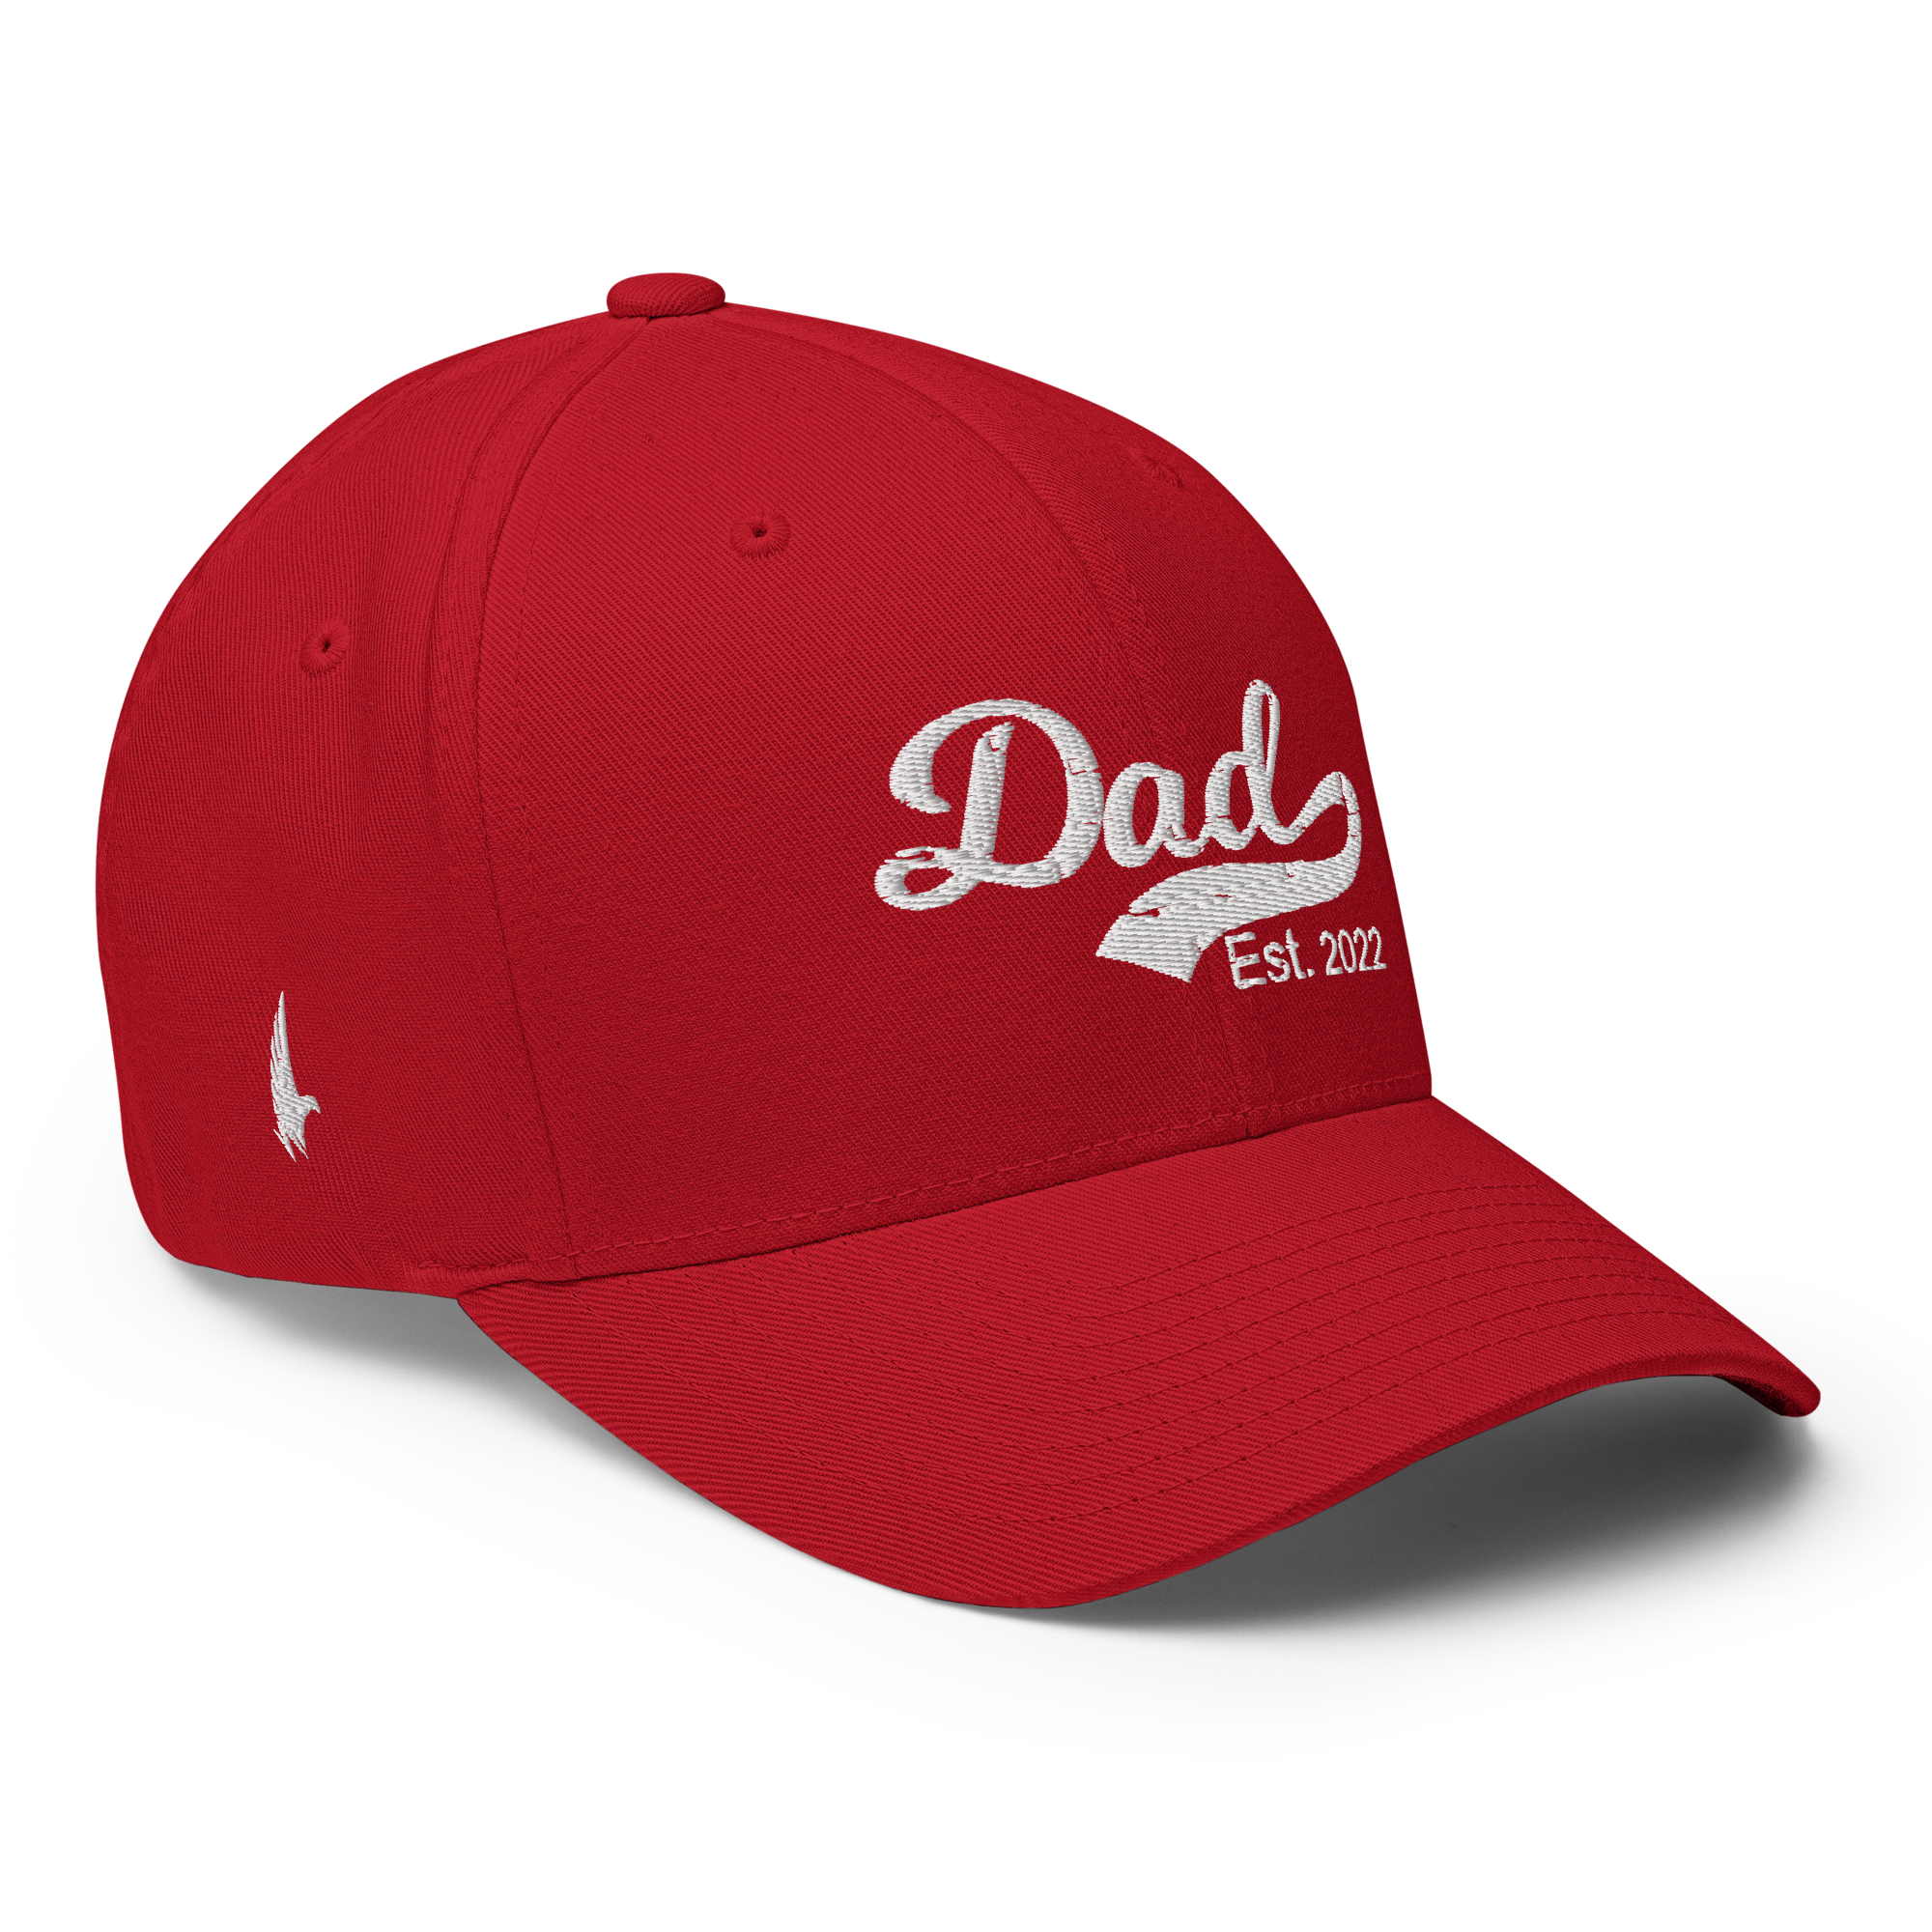 Dad Est 2022 Fitted Hat Red - Loyalty Vibes